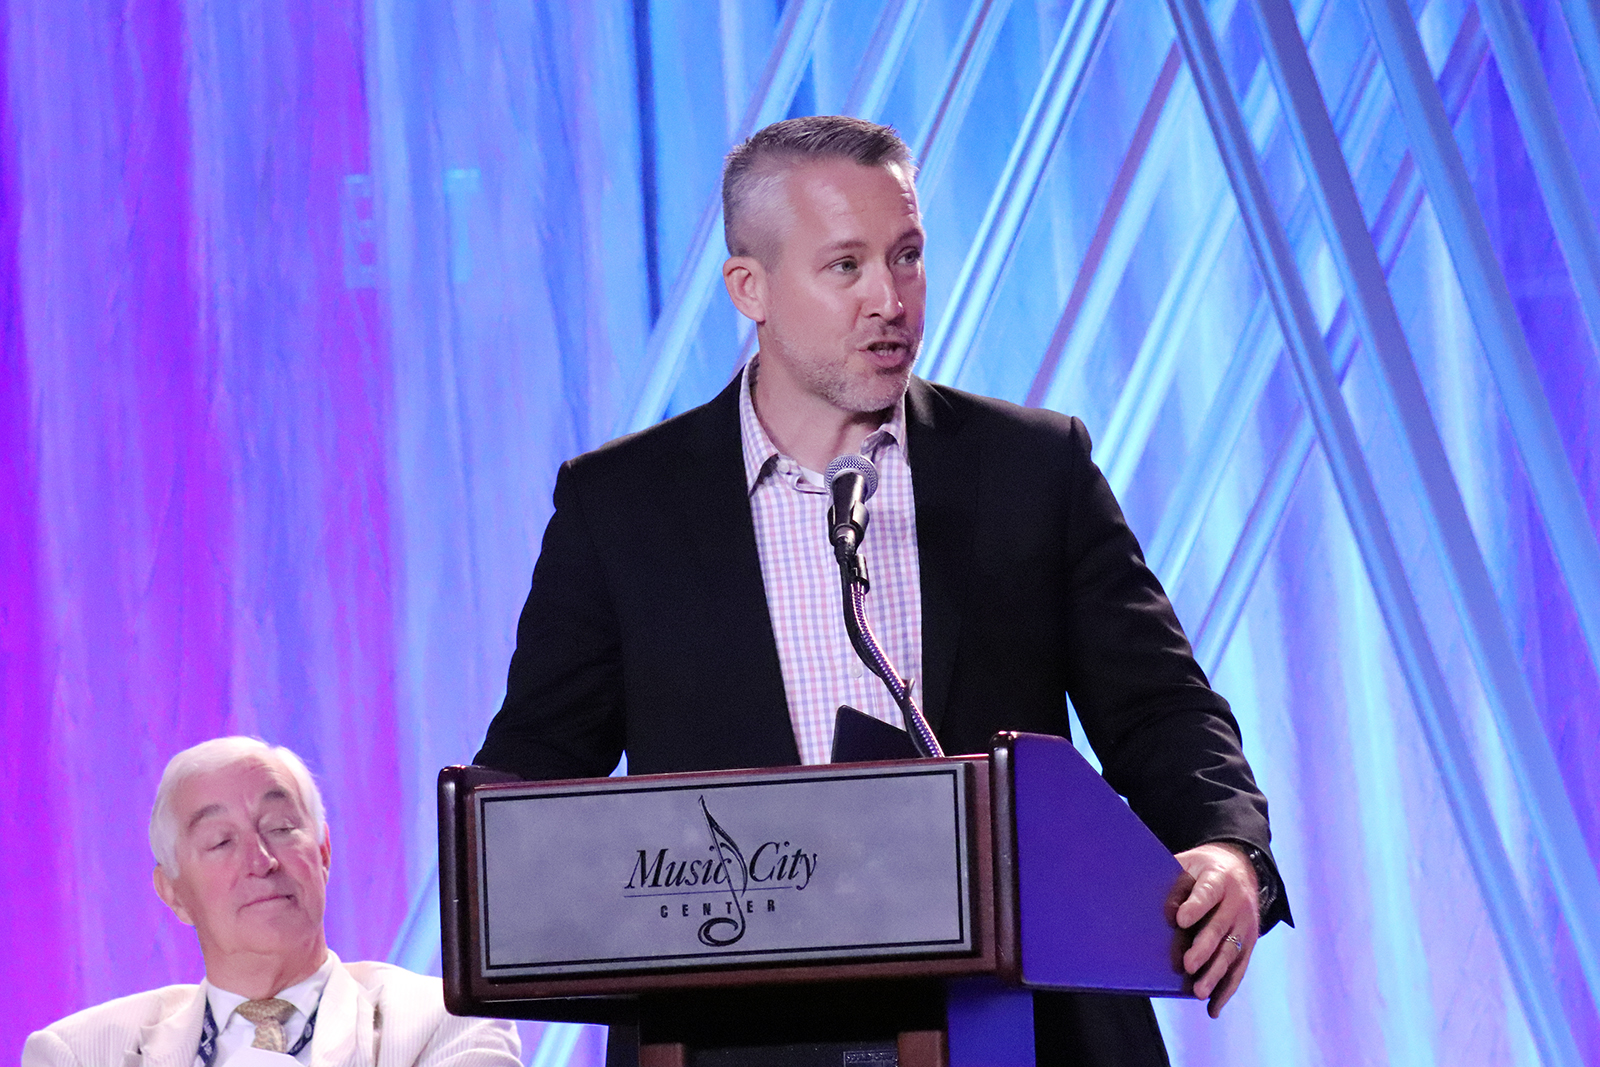 Southern Baptist Convention President J.D. Greear speaks during the Executive Committee meeting Monday, June 14, 2021, in Nashville. RNS photo by Adelle M. Banks